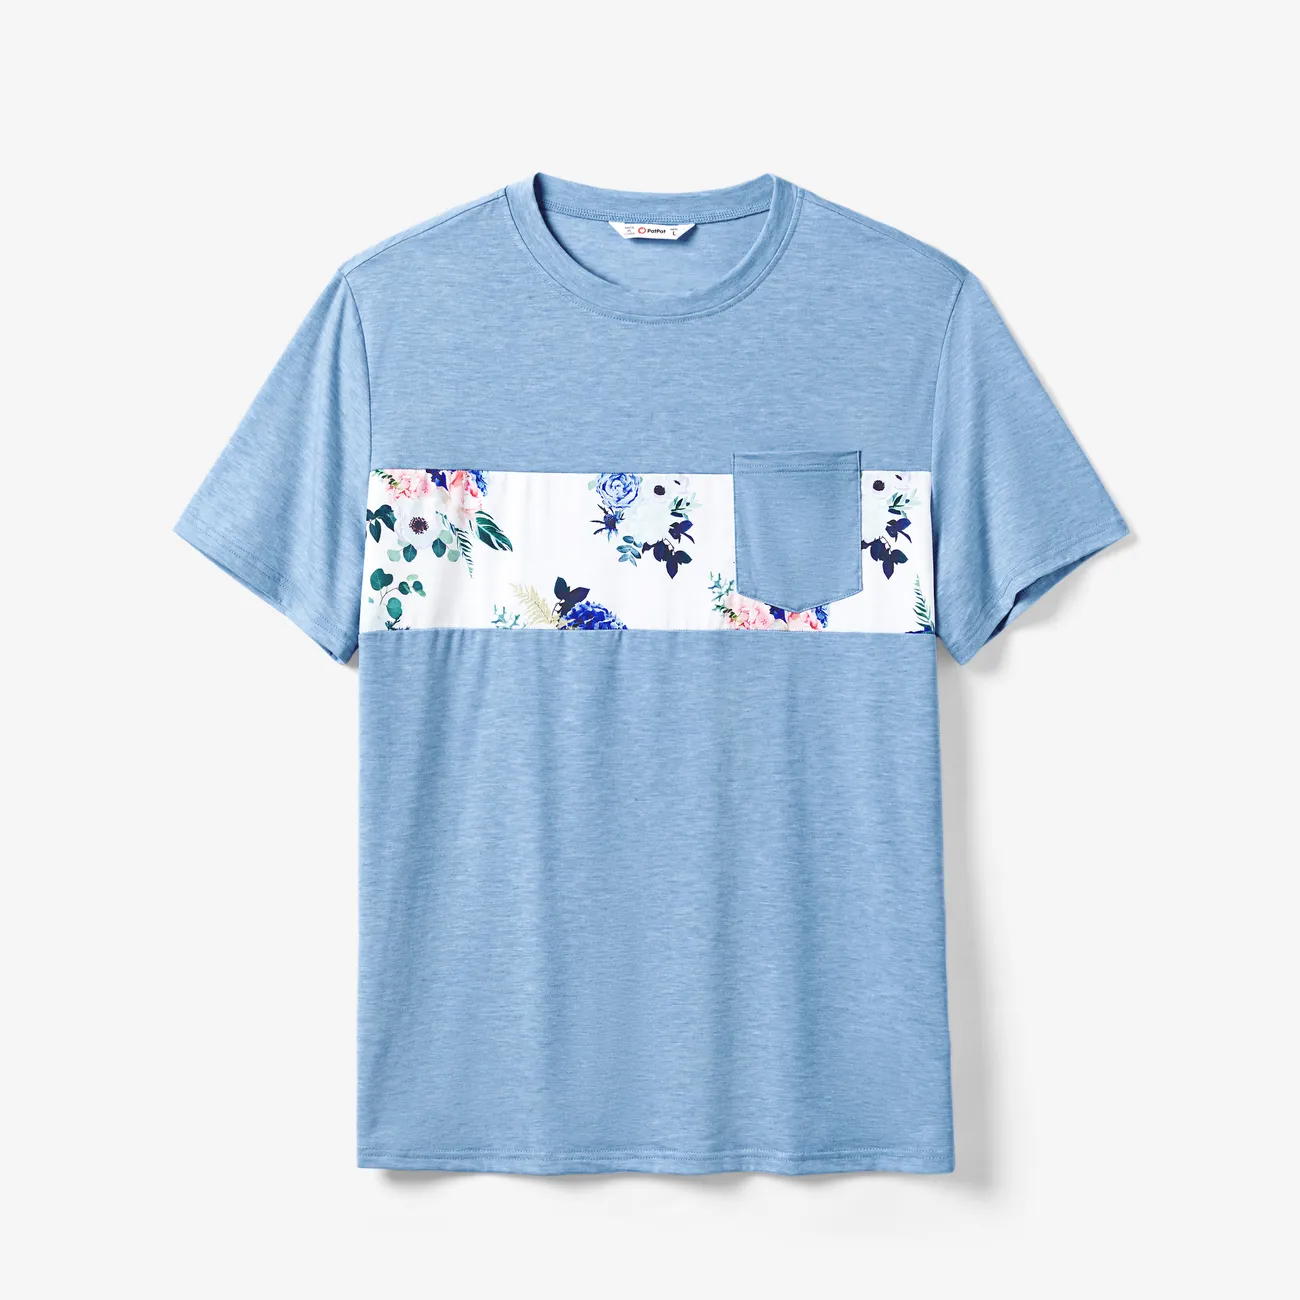 Family Matching Floral Colorblock T-Shirt and Quarter Button Belted Spliced A-Line Dress Sets lightskyblue big image 1